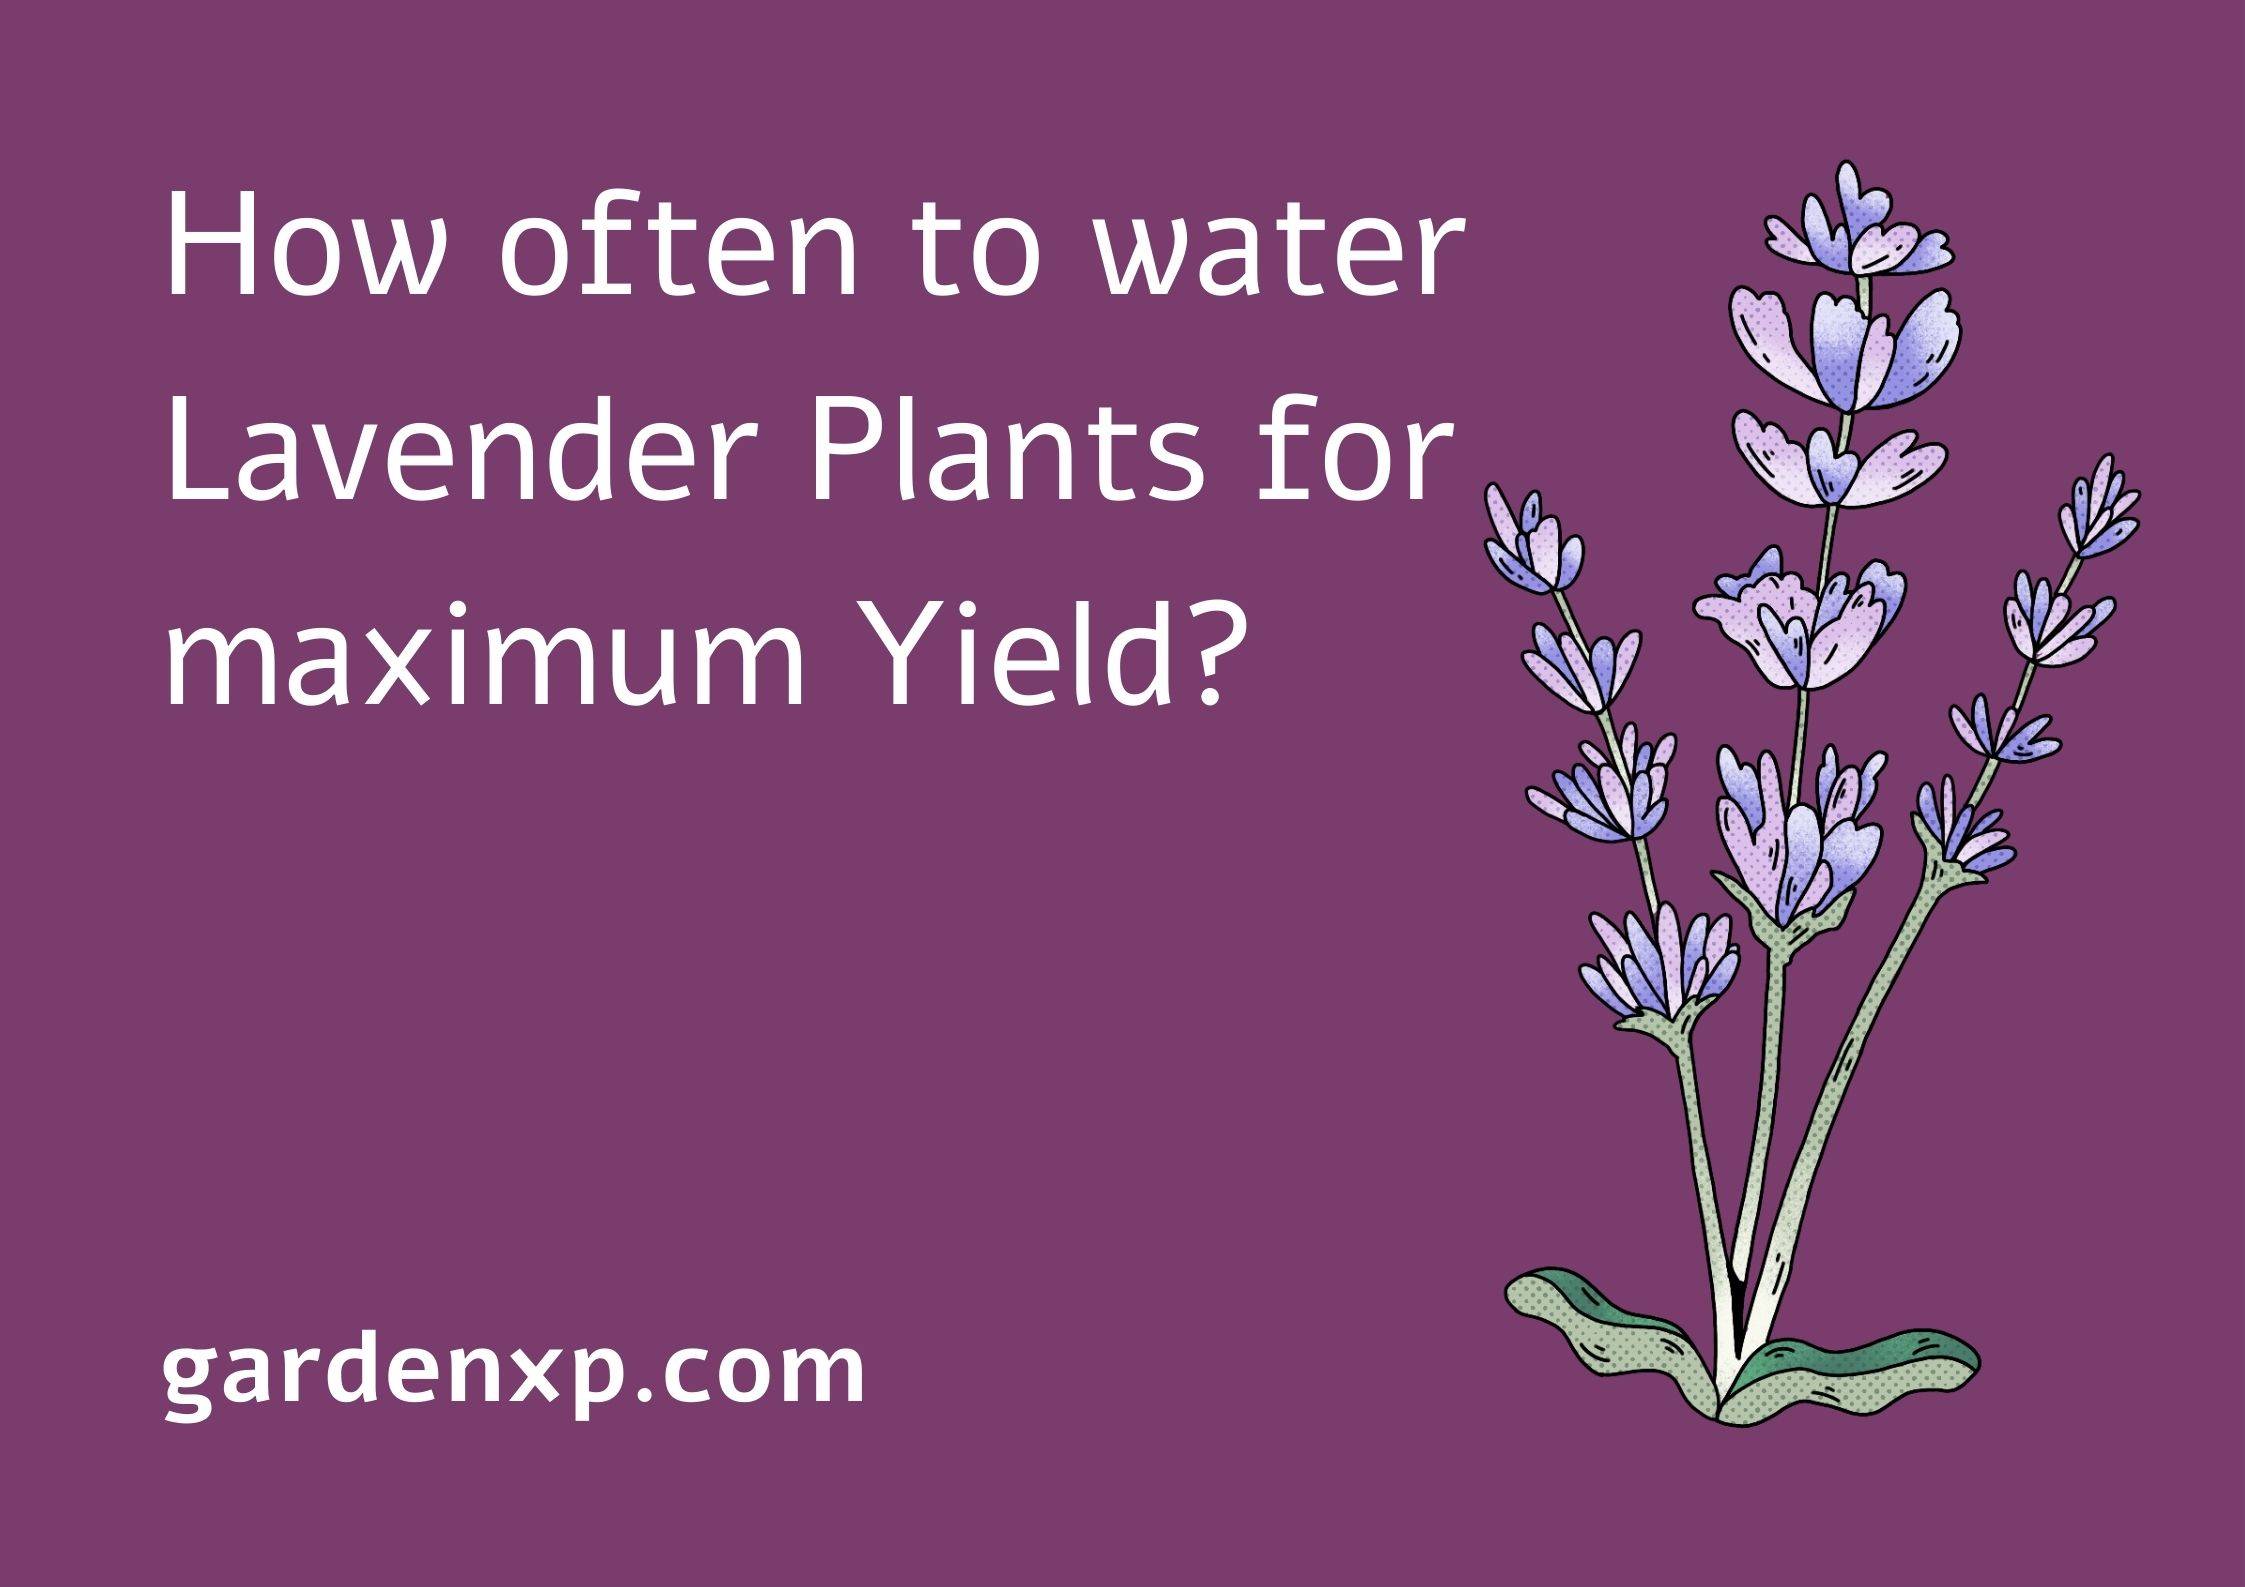 How often to water Lavender Plants for maximum yield? 